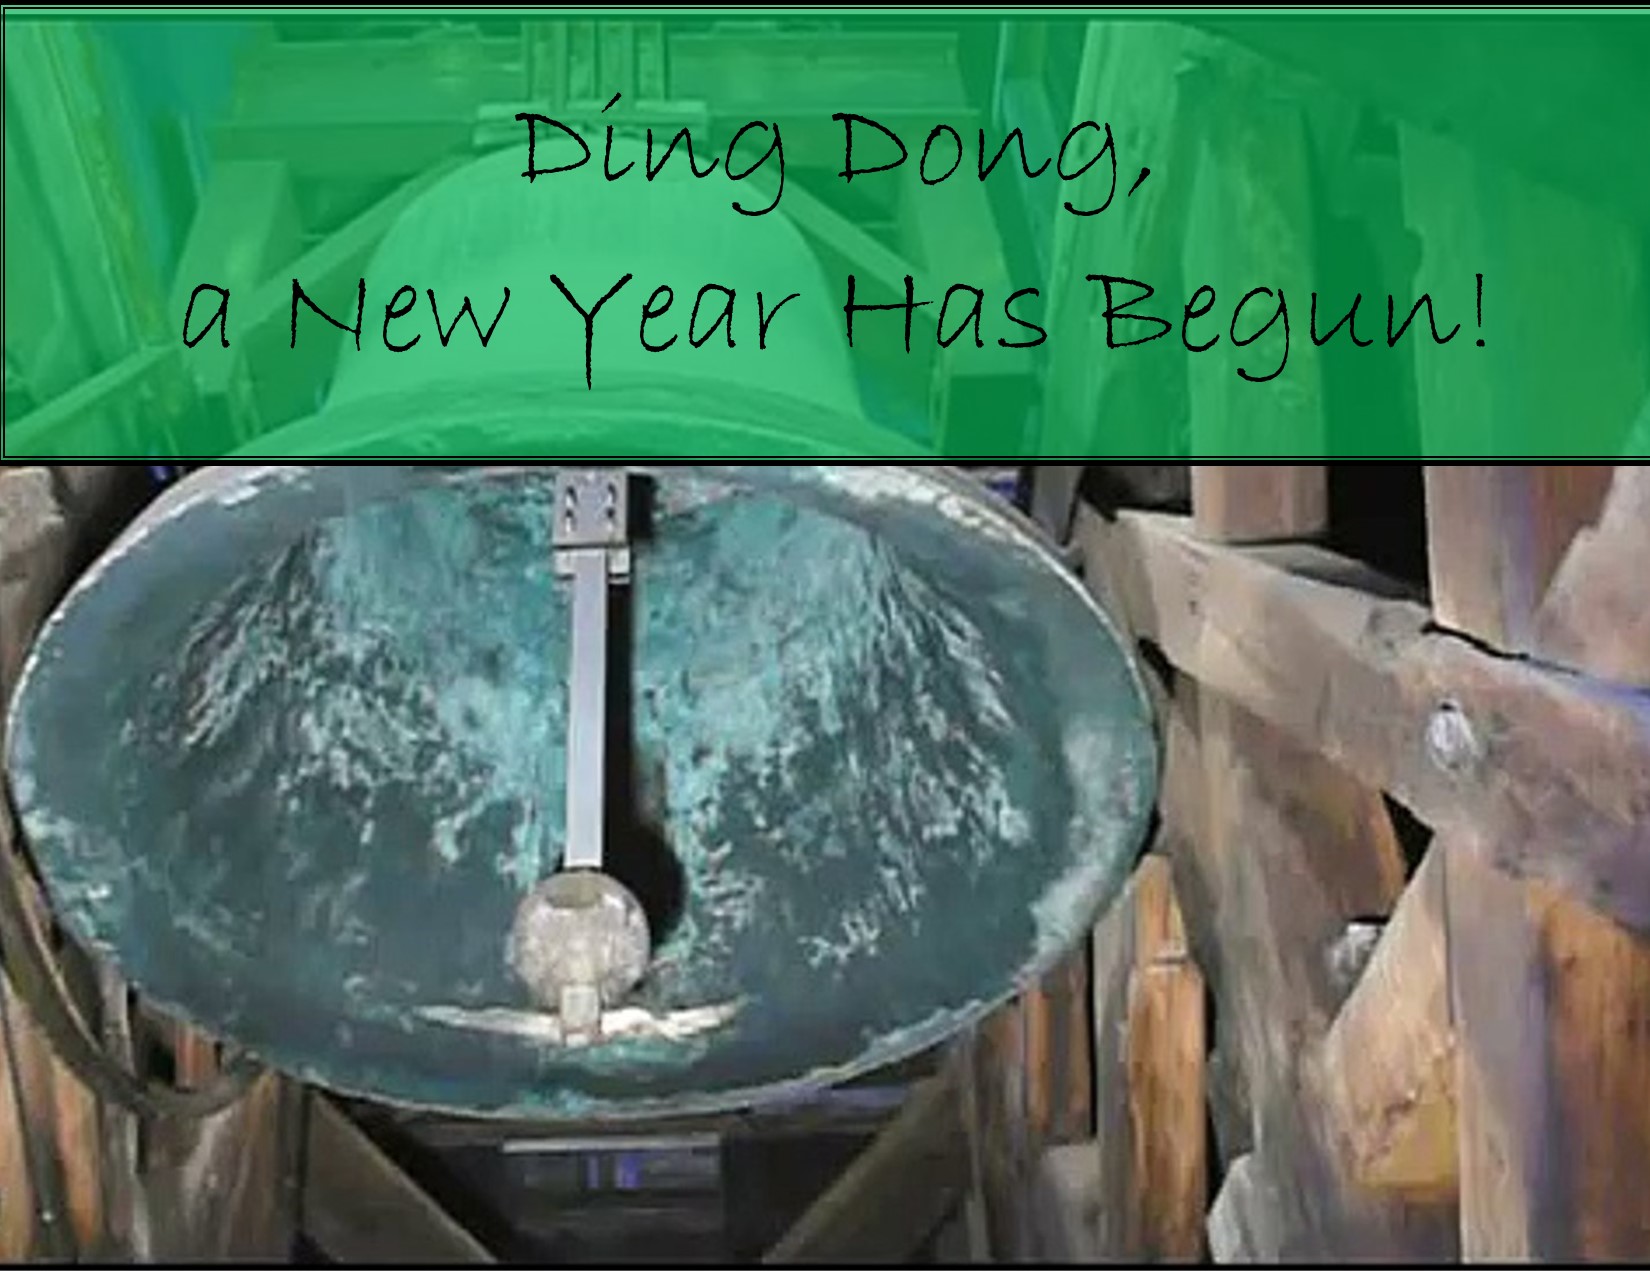 Ding Dong, a New Year Has Begun! (thank you, The Wizard of Oz!)